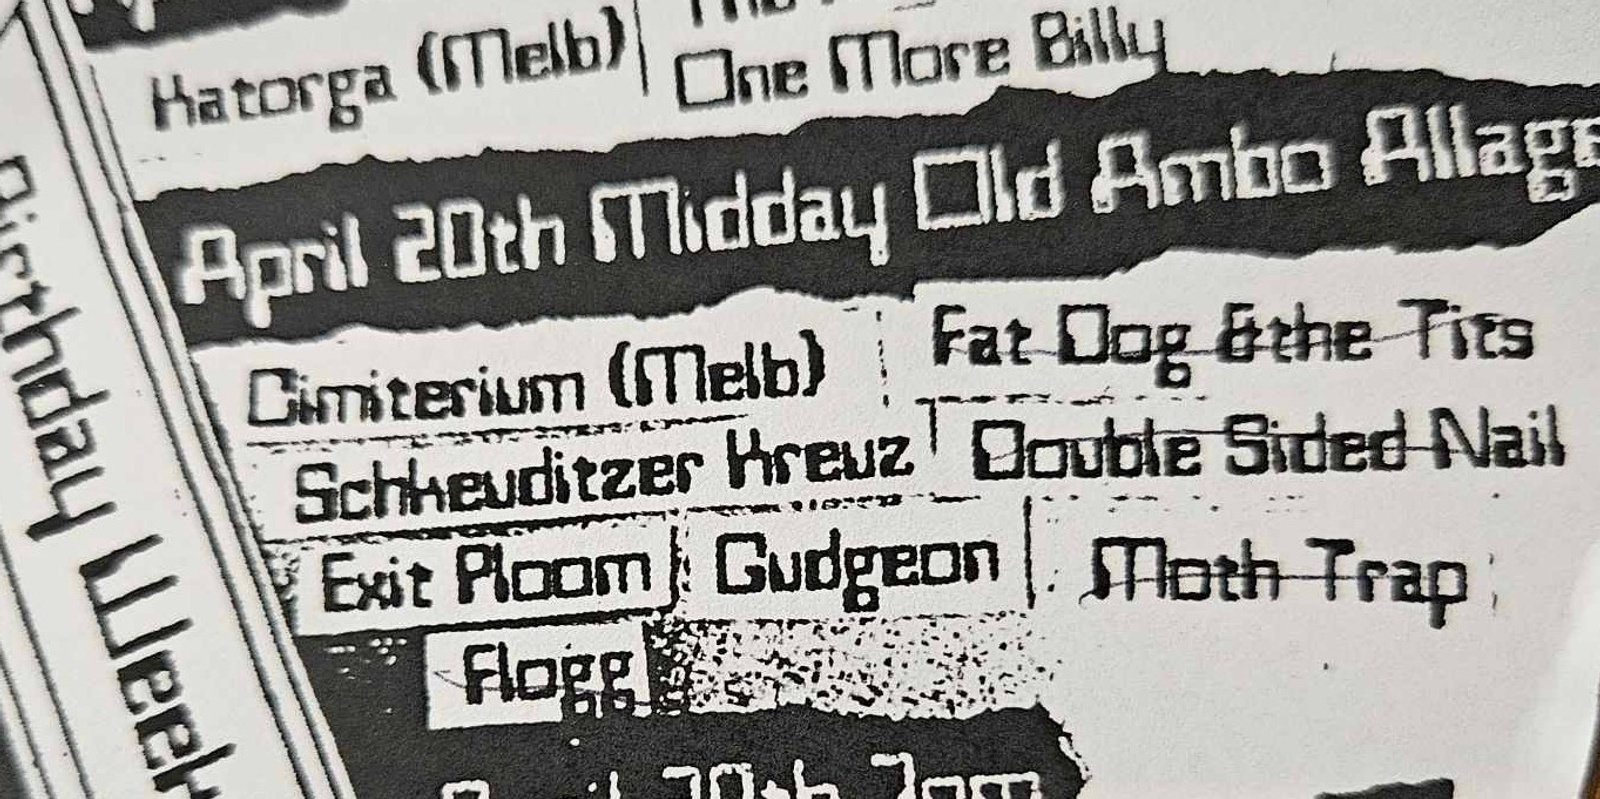 Banner image for CIMITERIUM, SCHKEUDITZER KREUZ, FAT DOG AND THE TITS, EXIT PLOOM, GUDGEON, DOUBLE SIDED NAIL, MOTH TRAP, FLOGG @ The Old Ambo Nambour